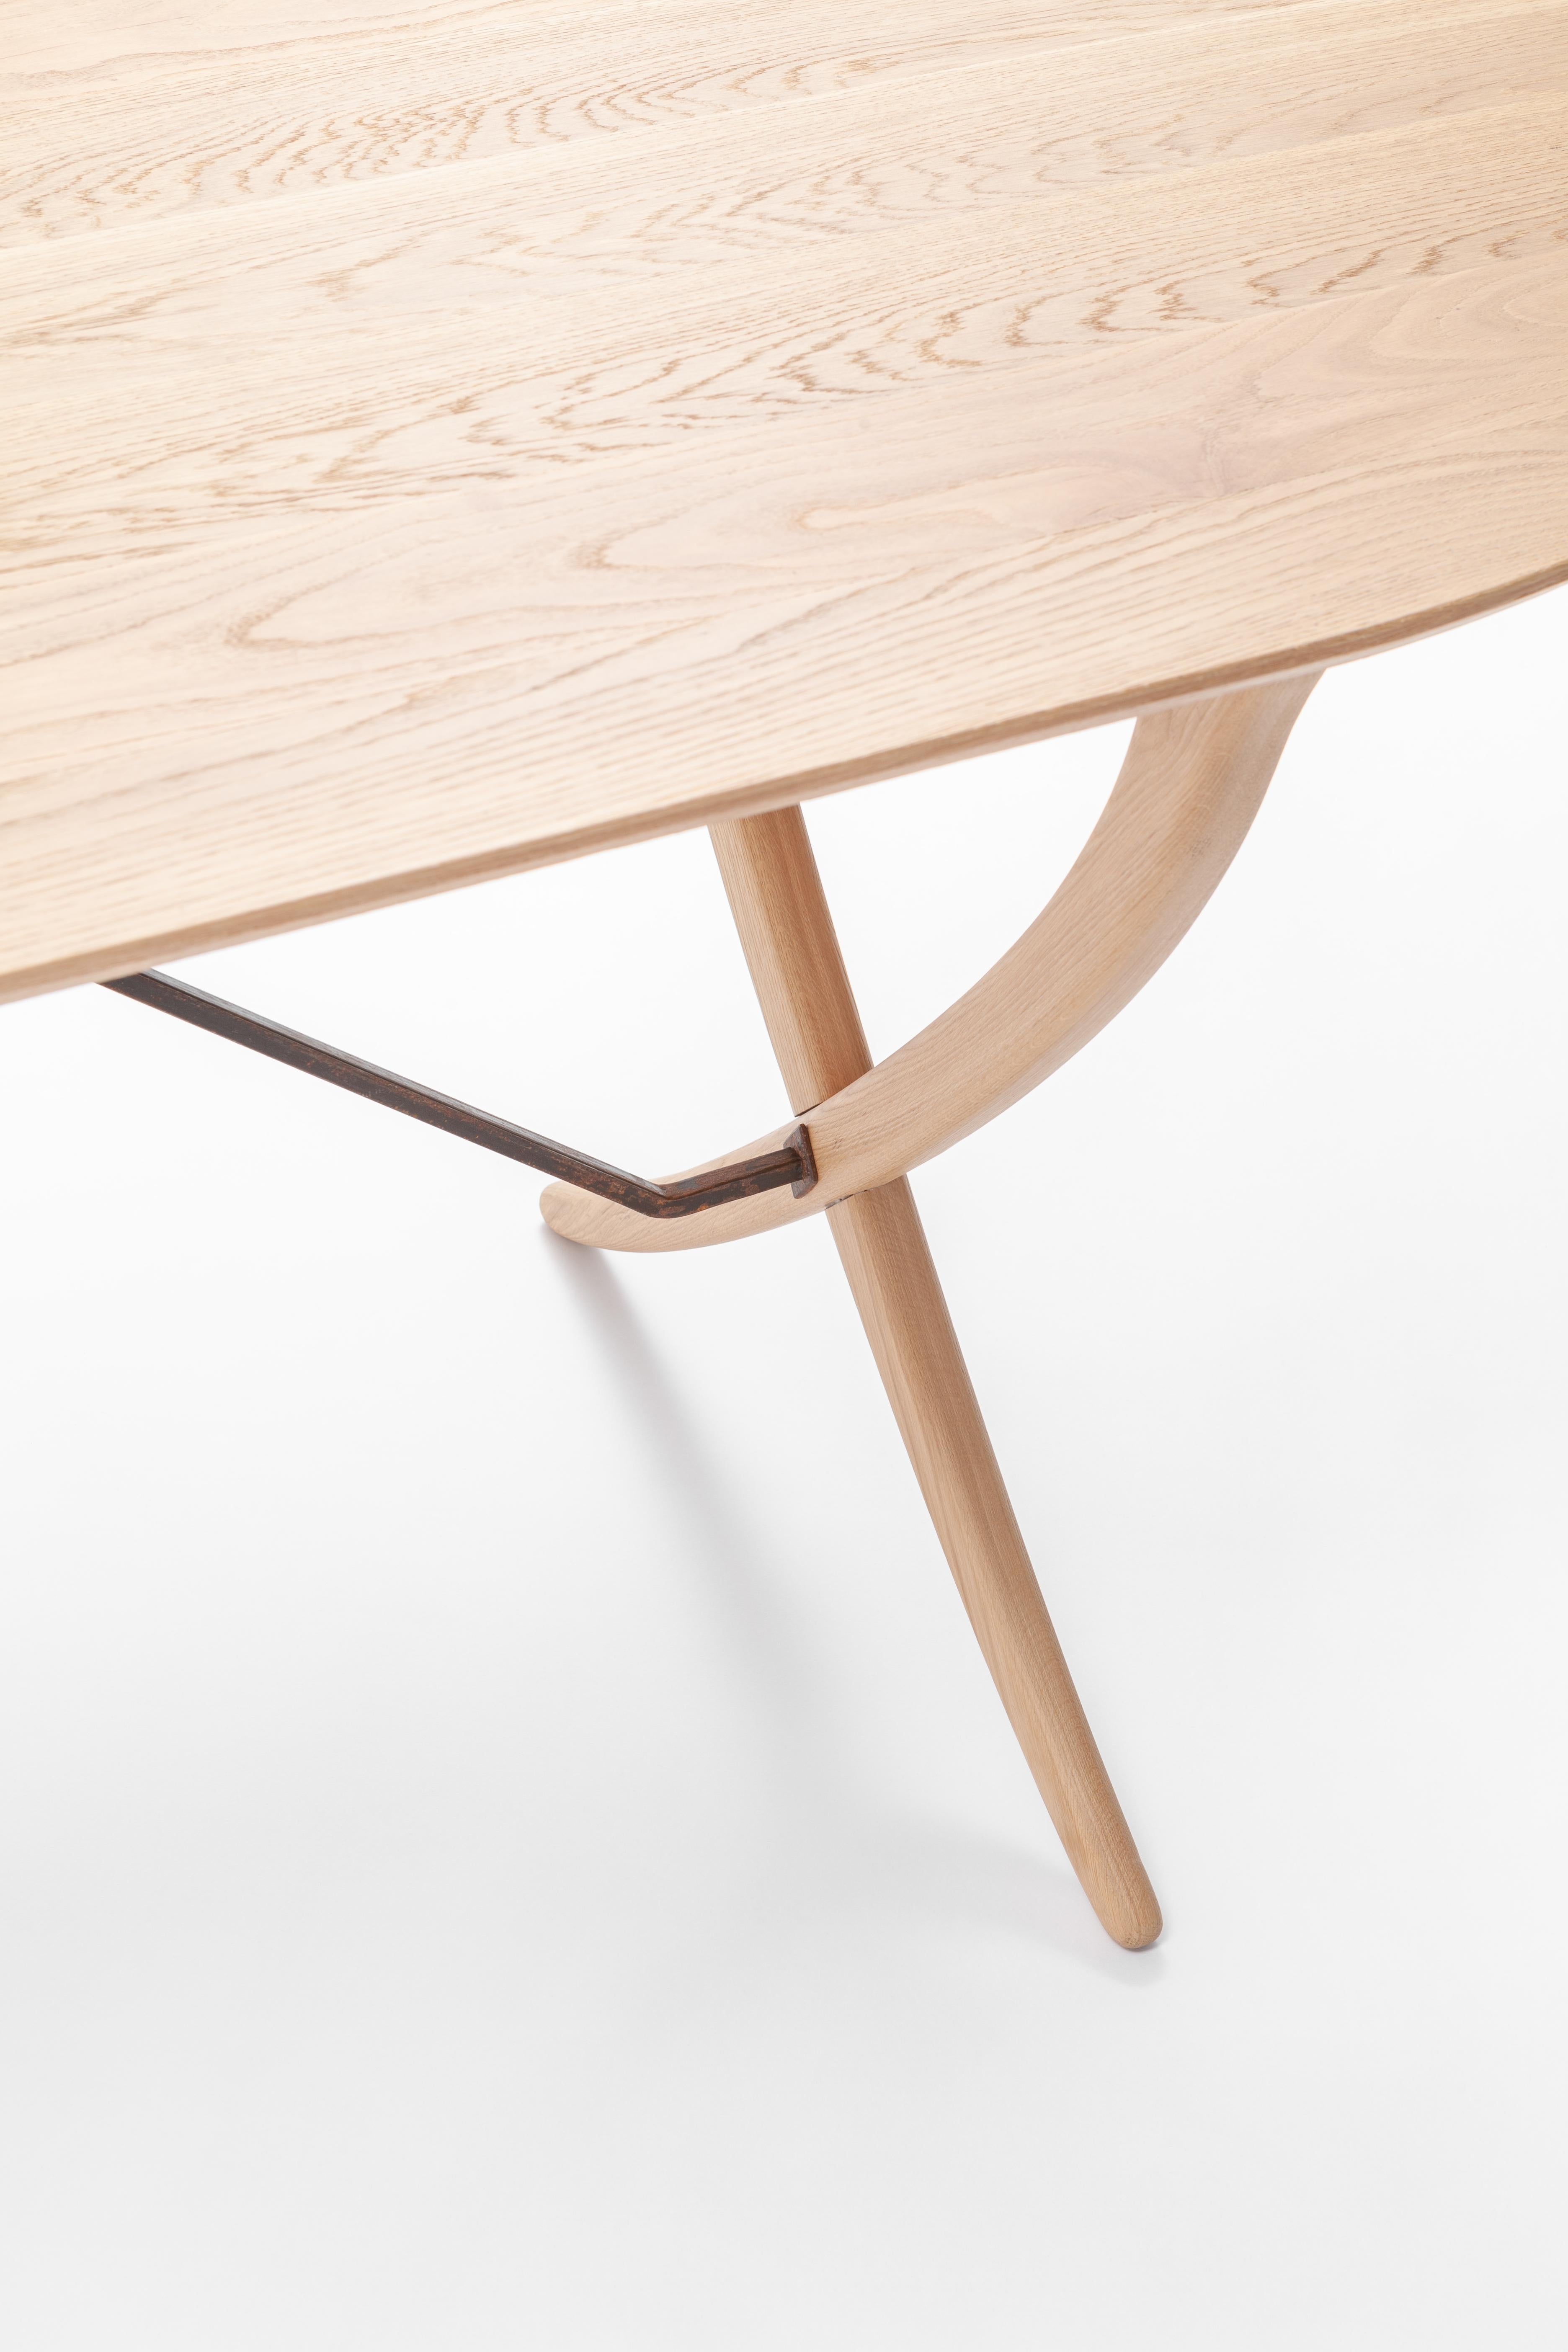 The Arch table comes from the desire to attain a lightness of shapes, expressed through fine and essential design lines.
Inspired by Scandinavian design, it is re-interpreted in an Italian artisan aesthetic.
The durmast is brushed to make the wood